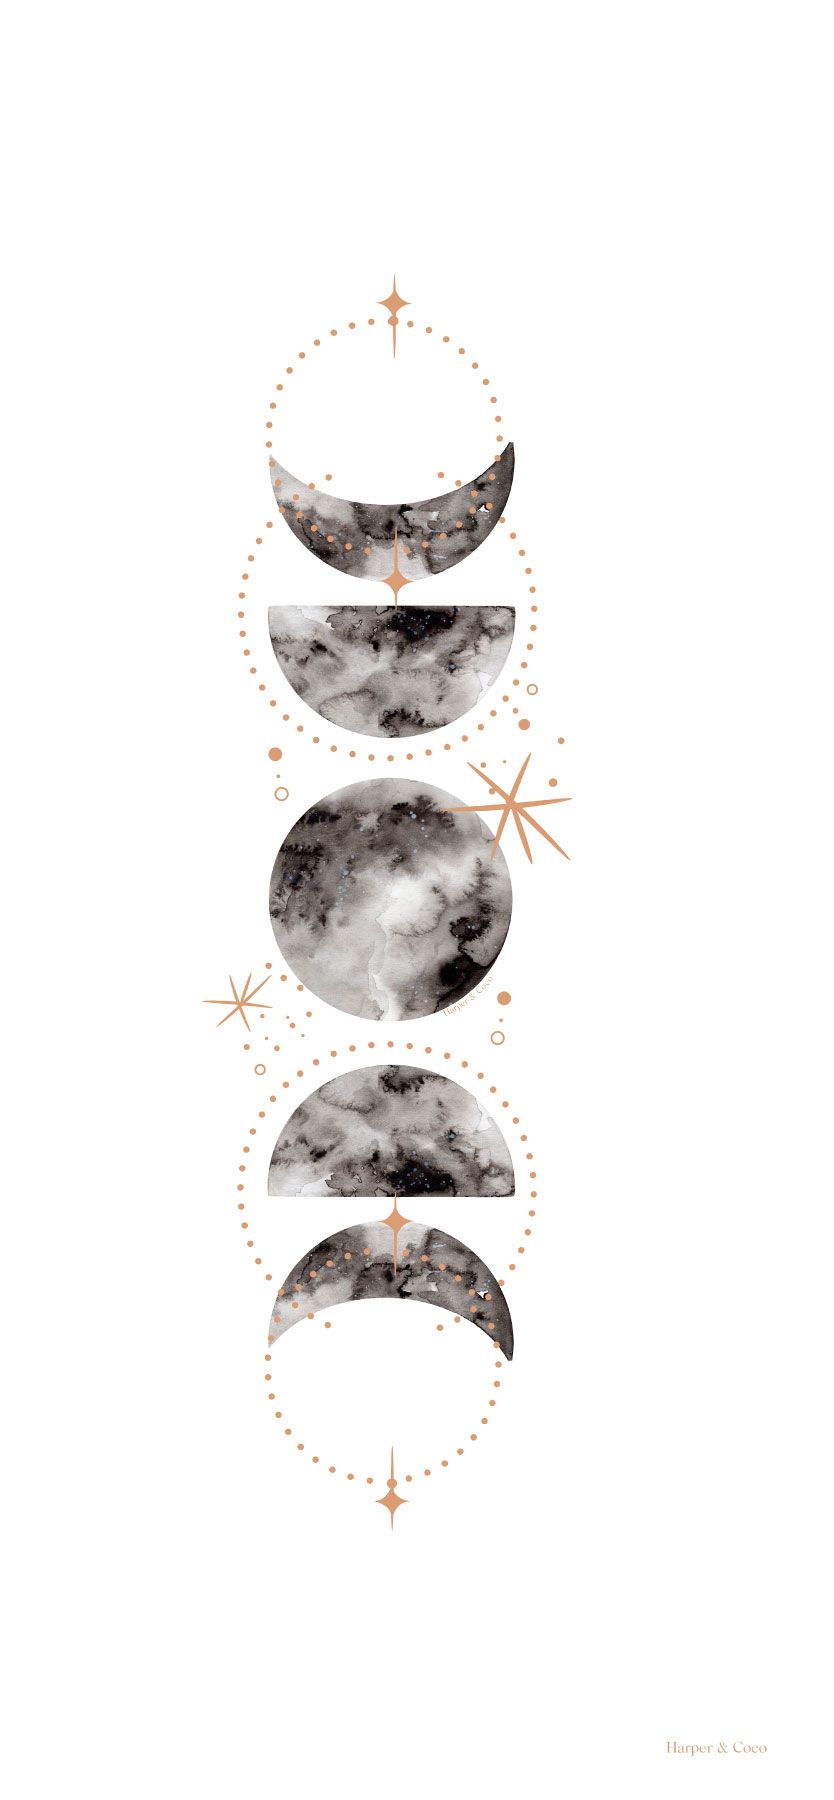 Moon Phases iPhone Wallpaper. iPhone .com